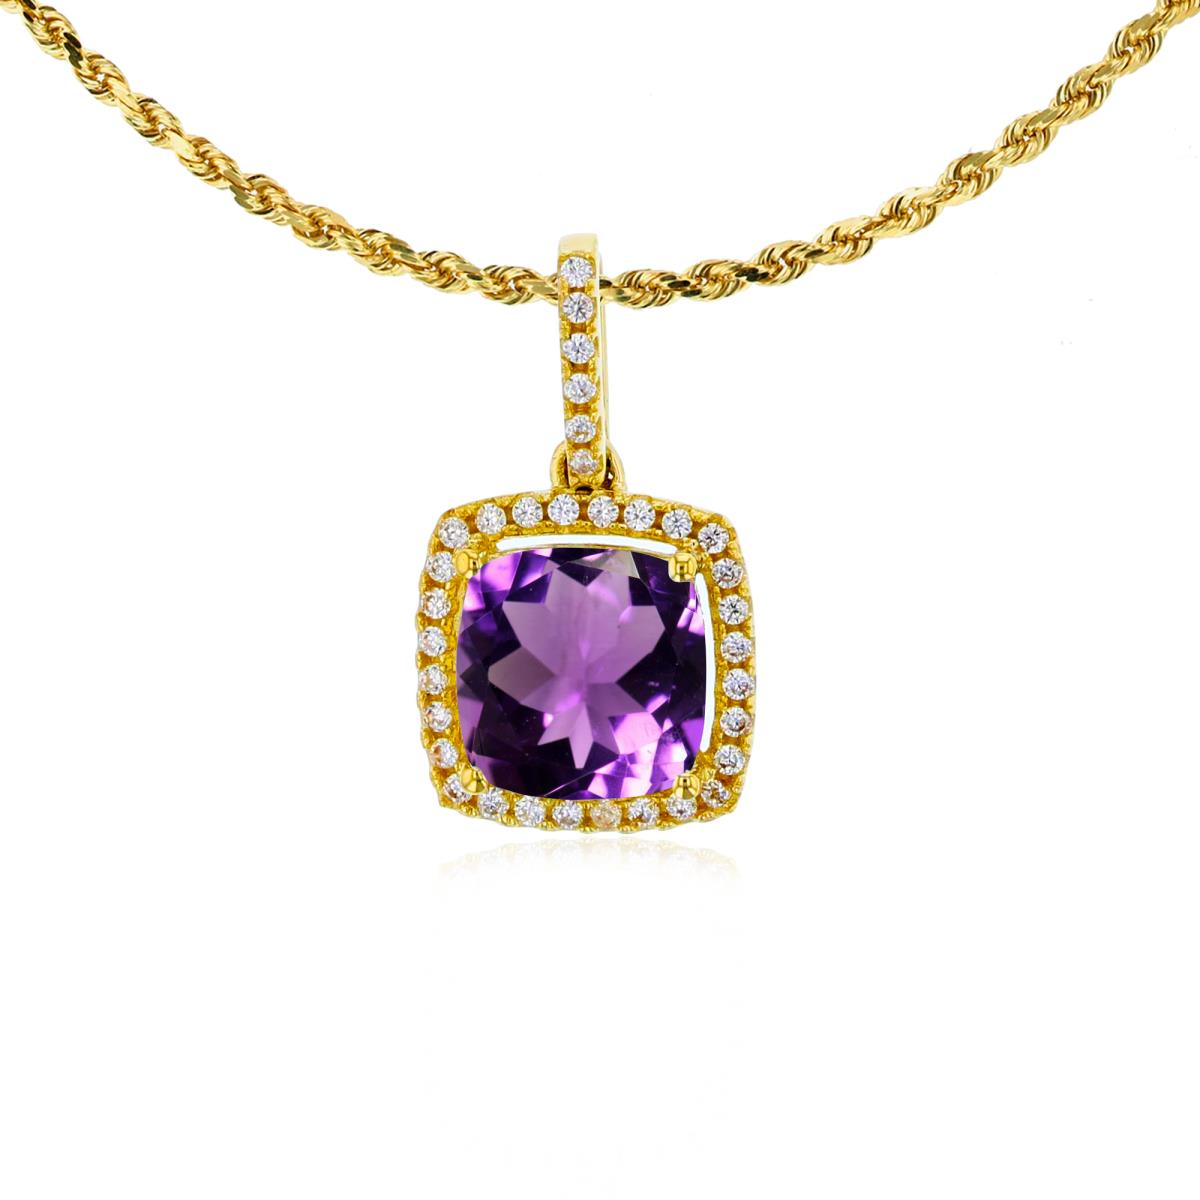 10K Yellow Gold 7mm Cushion Amethyst & 0.14 CTTW Rnd Diamond Halo 18" Rope Chain Necklace